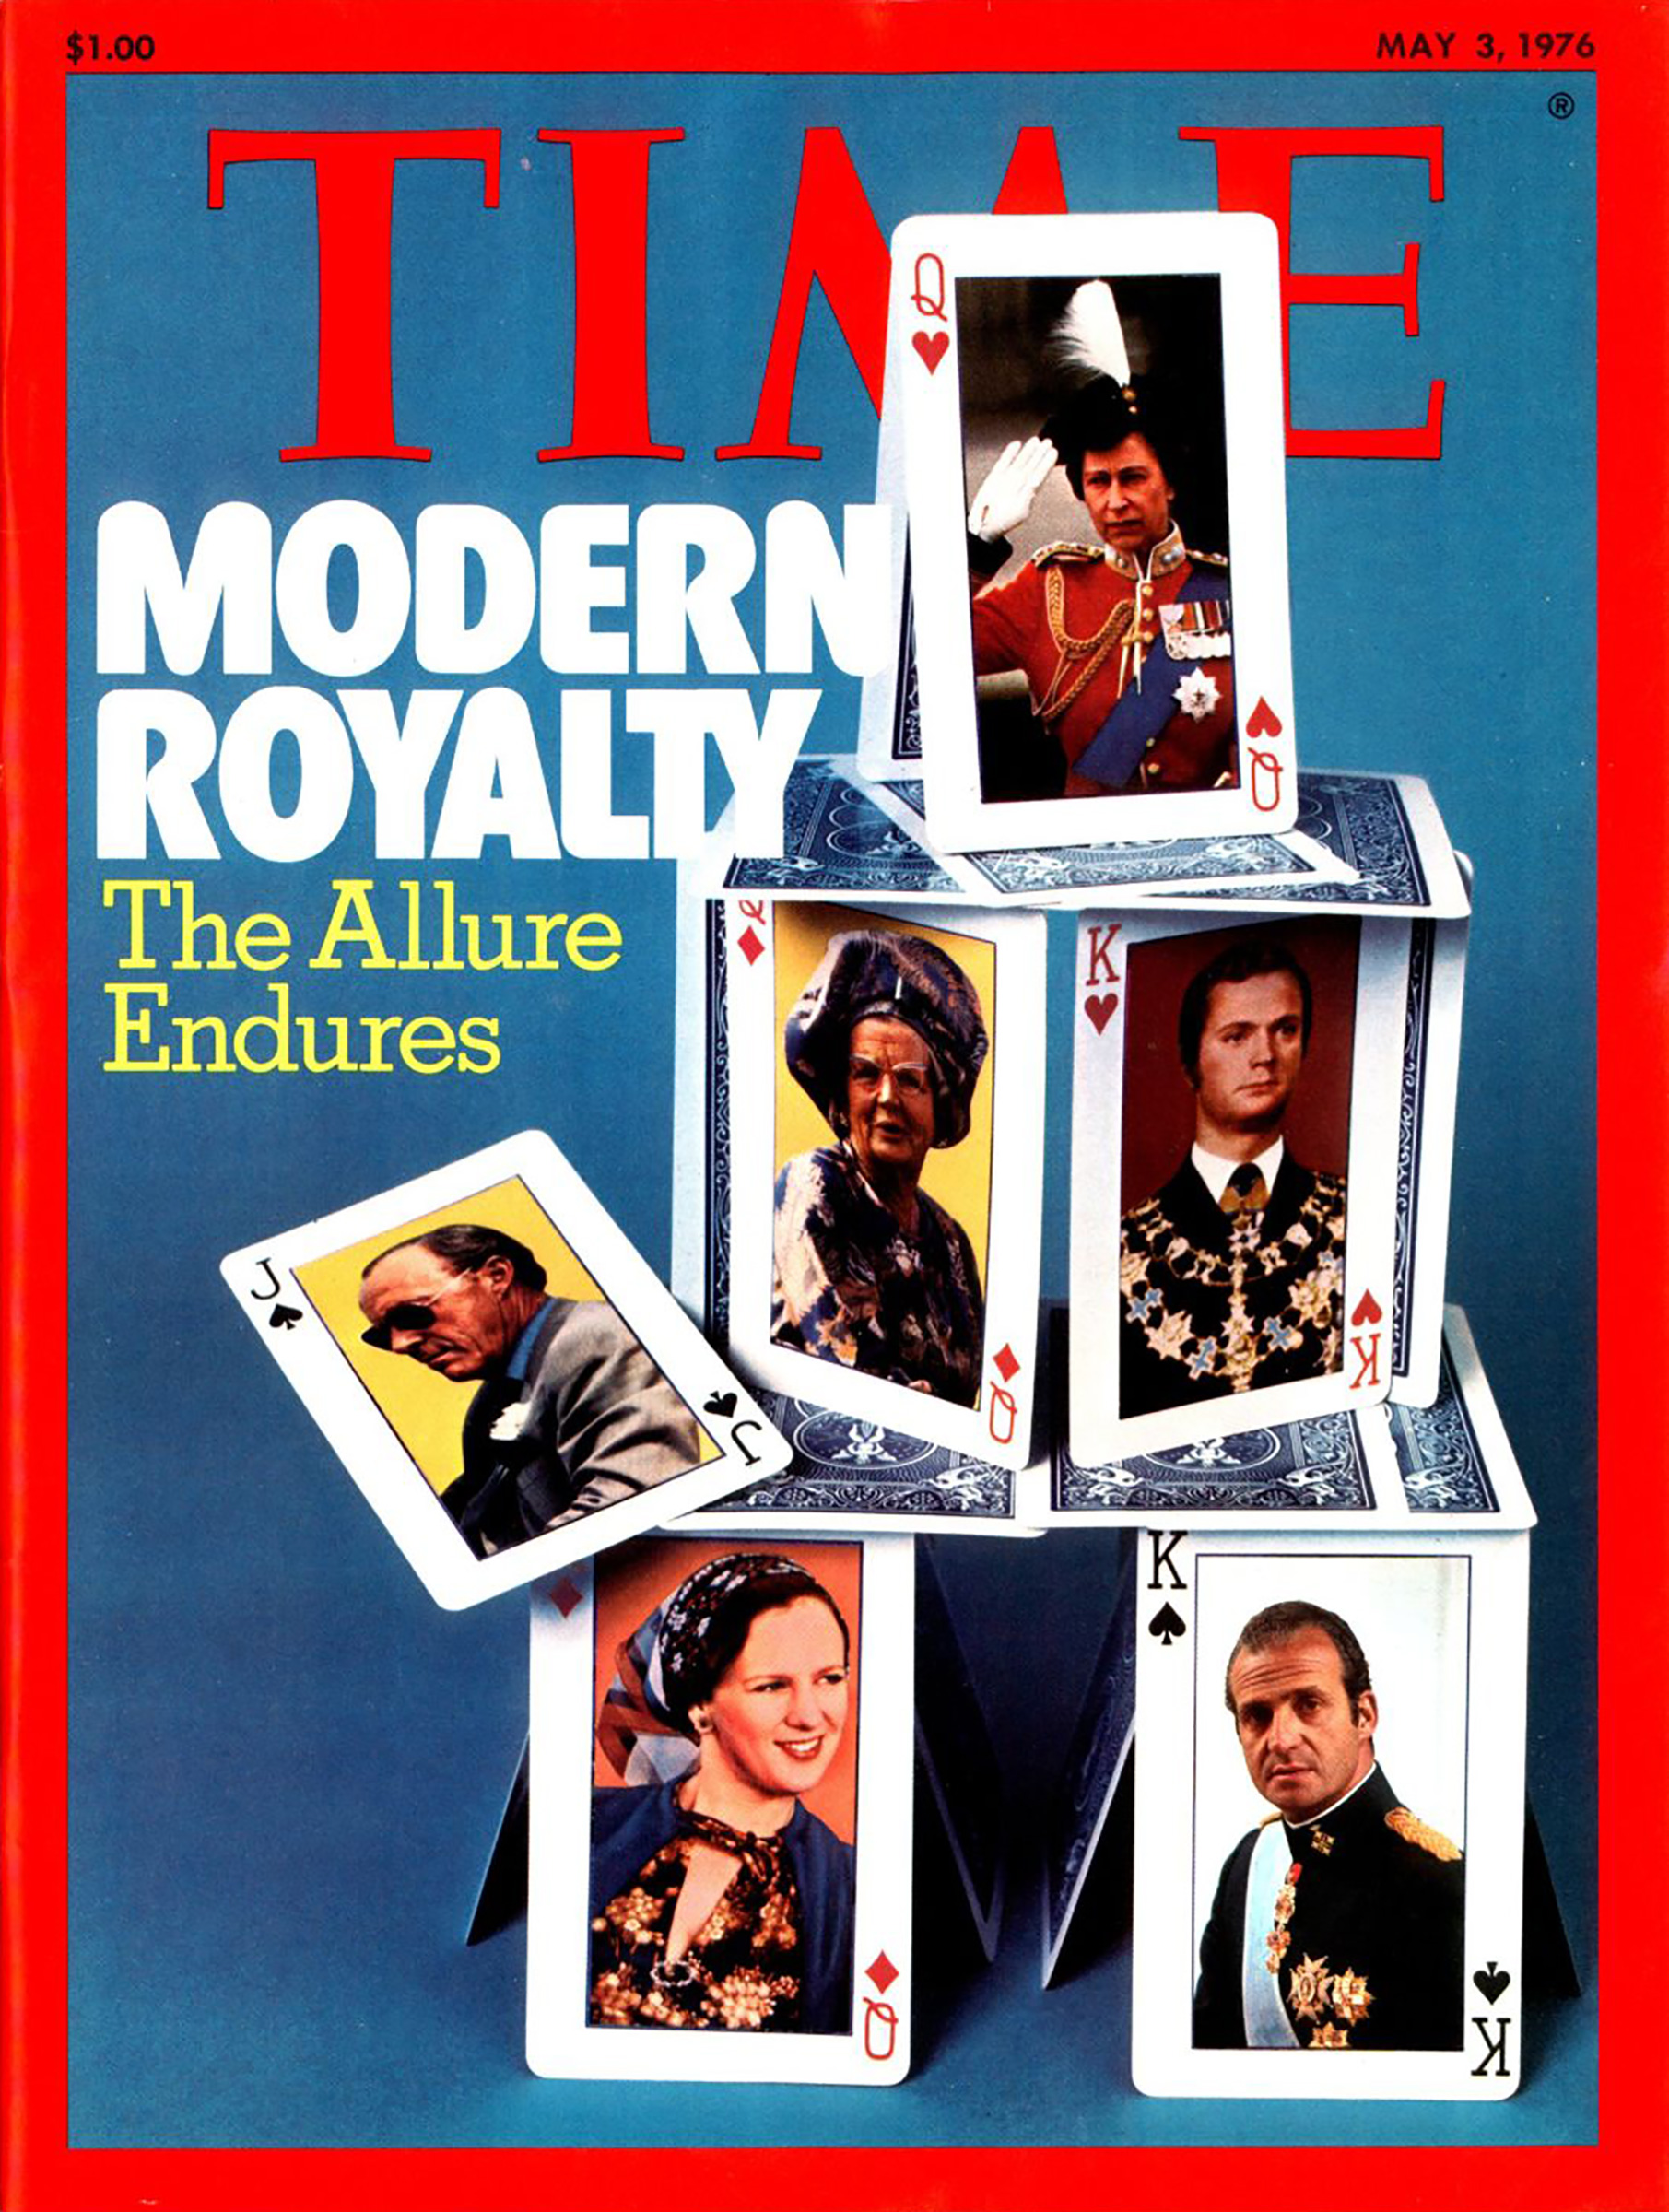 Queen Elizabeth (at top)—along with Carl XVI Gustaf of Sweden, Juan Carlos of Spain, Margrethe of Denmark, and Bernhard and Juliana of the Netherlands—on the May 3, 1976, cover of TIME